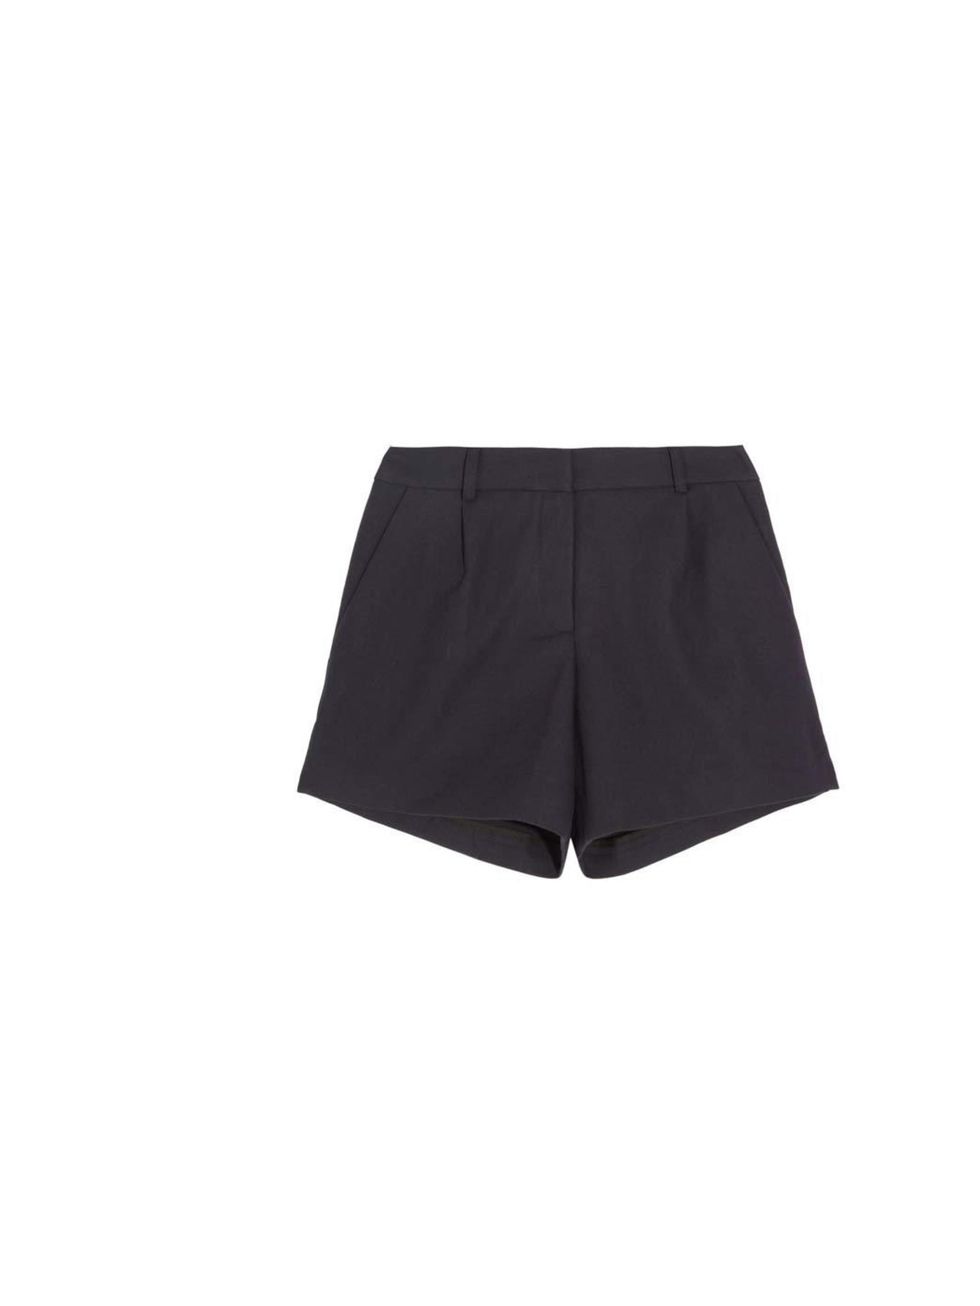 <p>A pair of tailored black shorts are invaluable for summertime in the city - pair with tan leather sandals for the office, and espadrilles when the weekend rolls around.</p><p>Iris & Ink shorts, £65 at <a href="http://www.theoutnet.com/product/358081">T